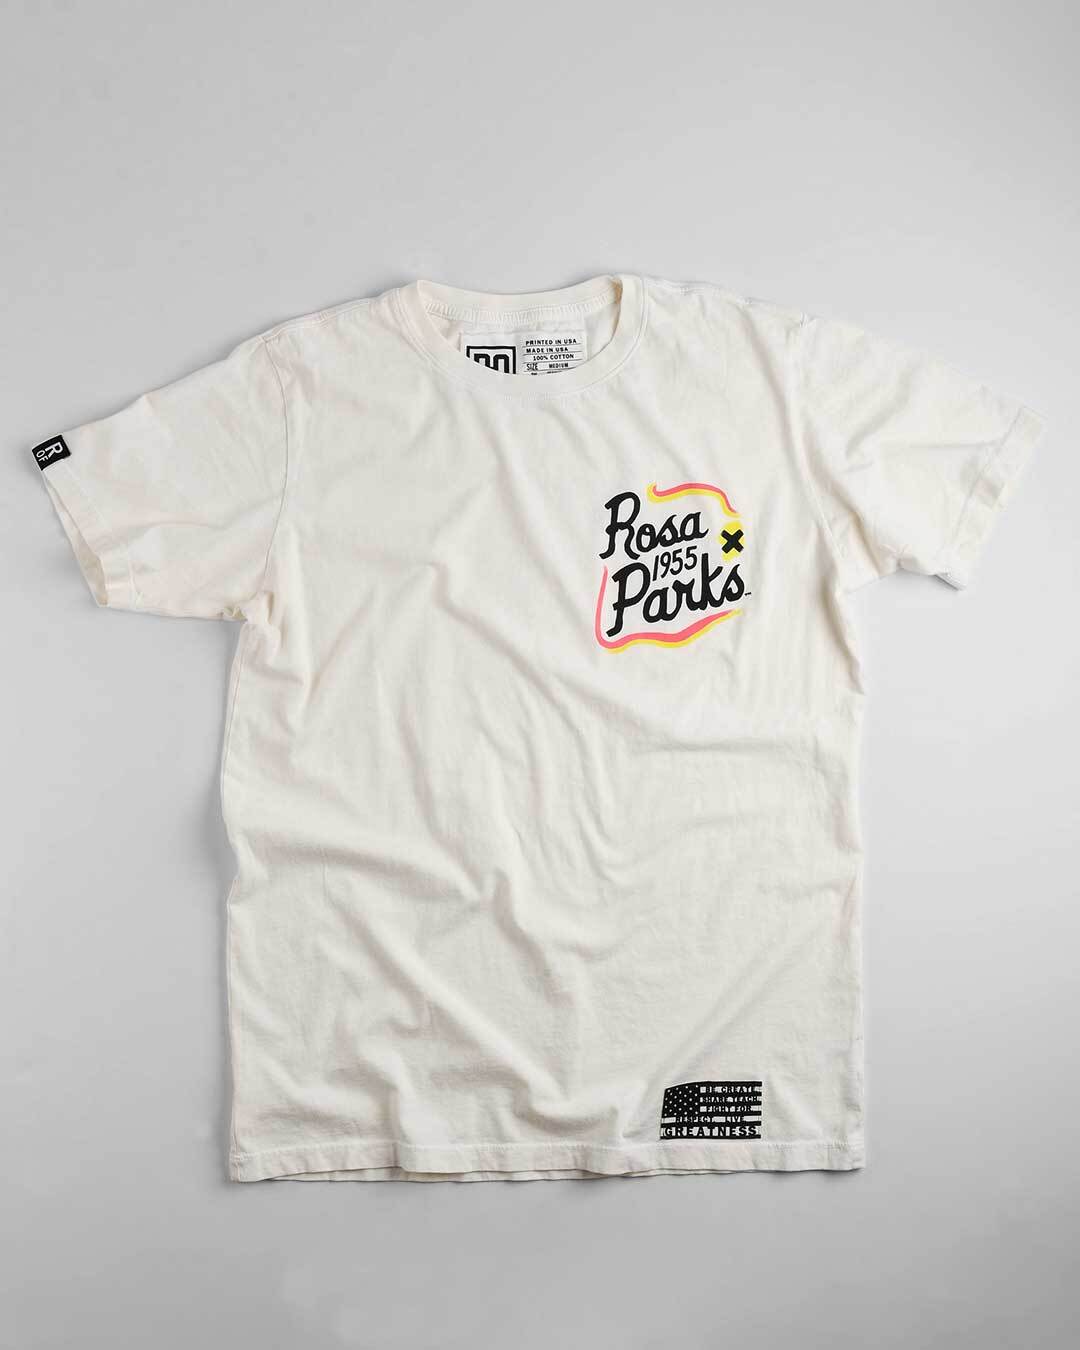 BHT - Rosa Parks 1955 White Tee - Roots of Fight